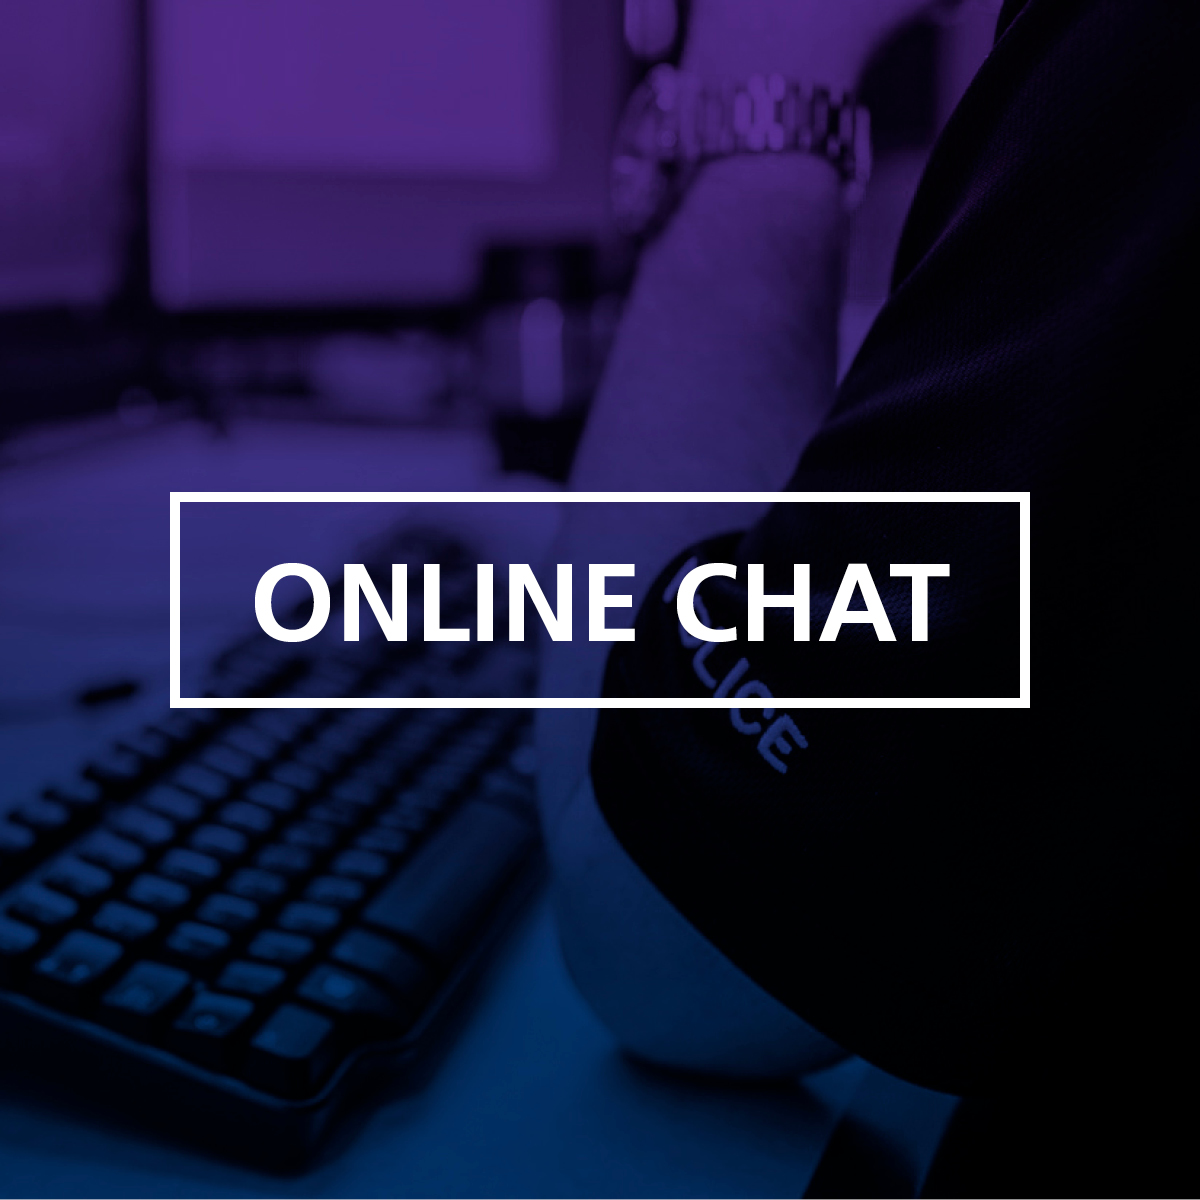 Our next online chat is tonight, local officers from across the city will be online to answer any questions or concerns you have. To join the chat or to ask any questions/concerns you have please click on the link below orlo.uk/BEYga